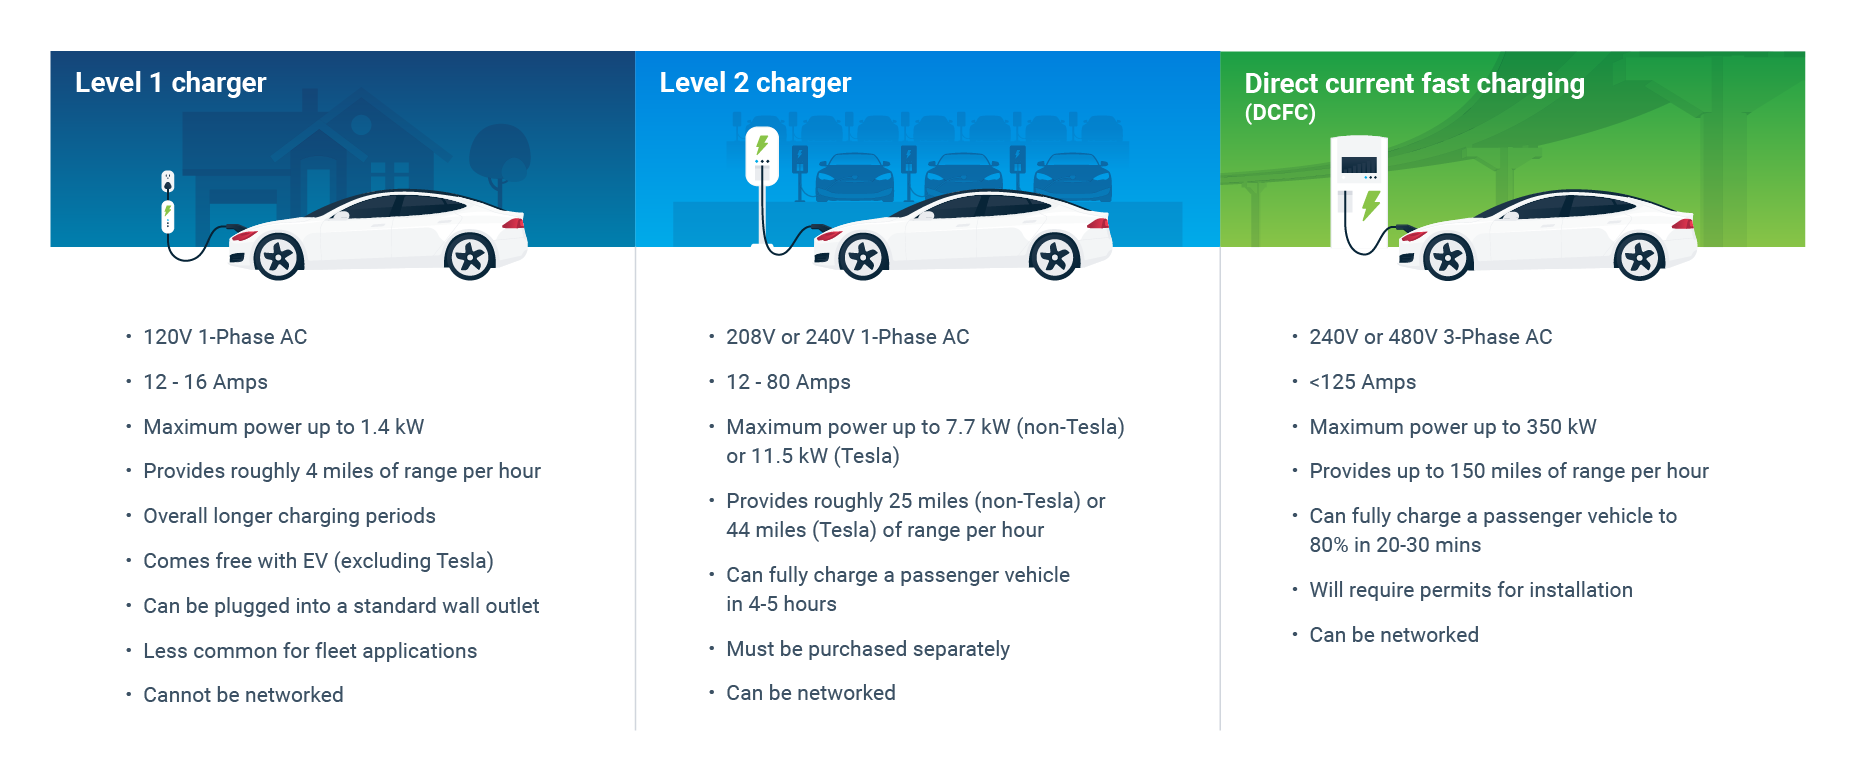 Fast charging standards: How many are there? How are they different?